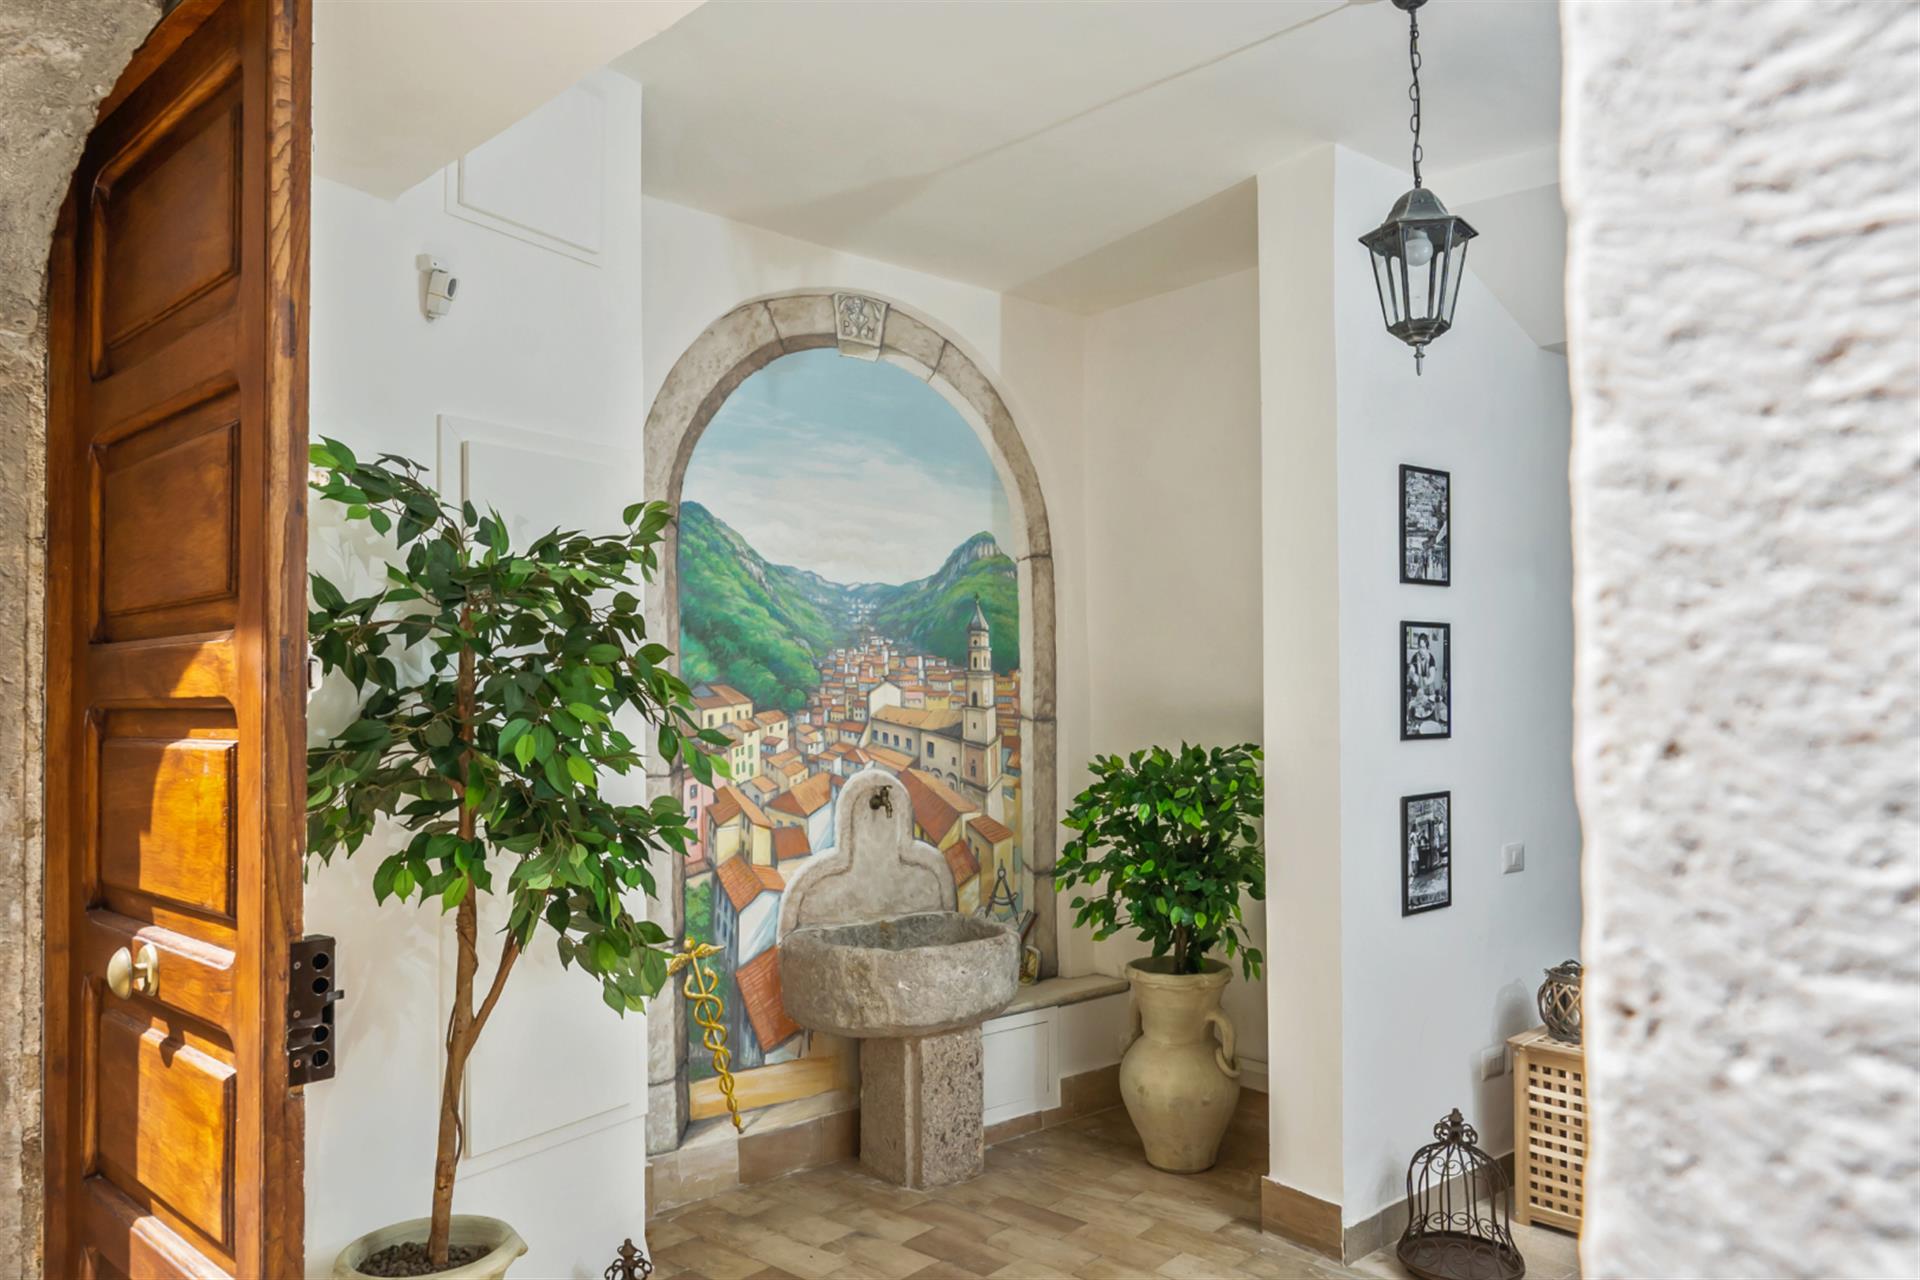 A unique opportunity to co-own a beautifully restored apartment in a historic Palazzo set in the pic